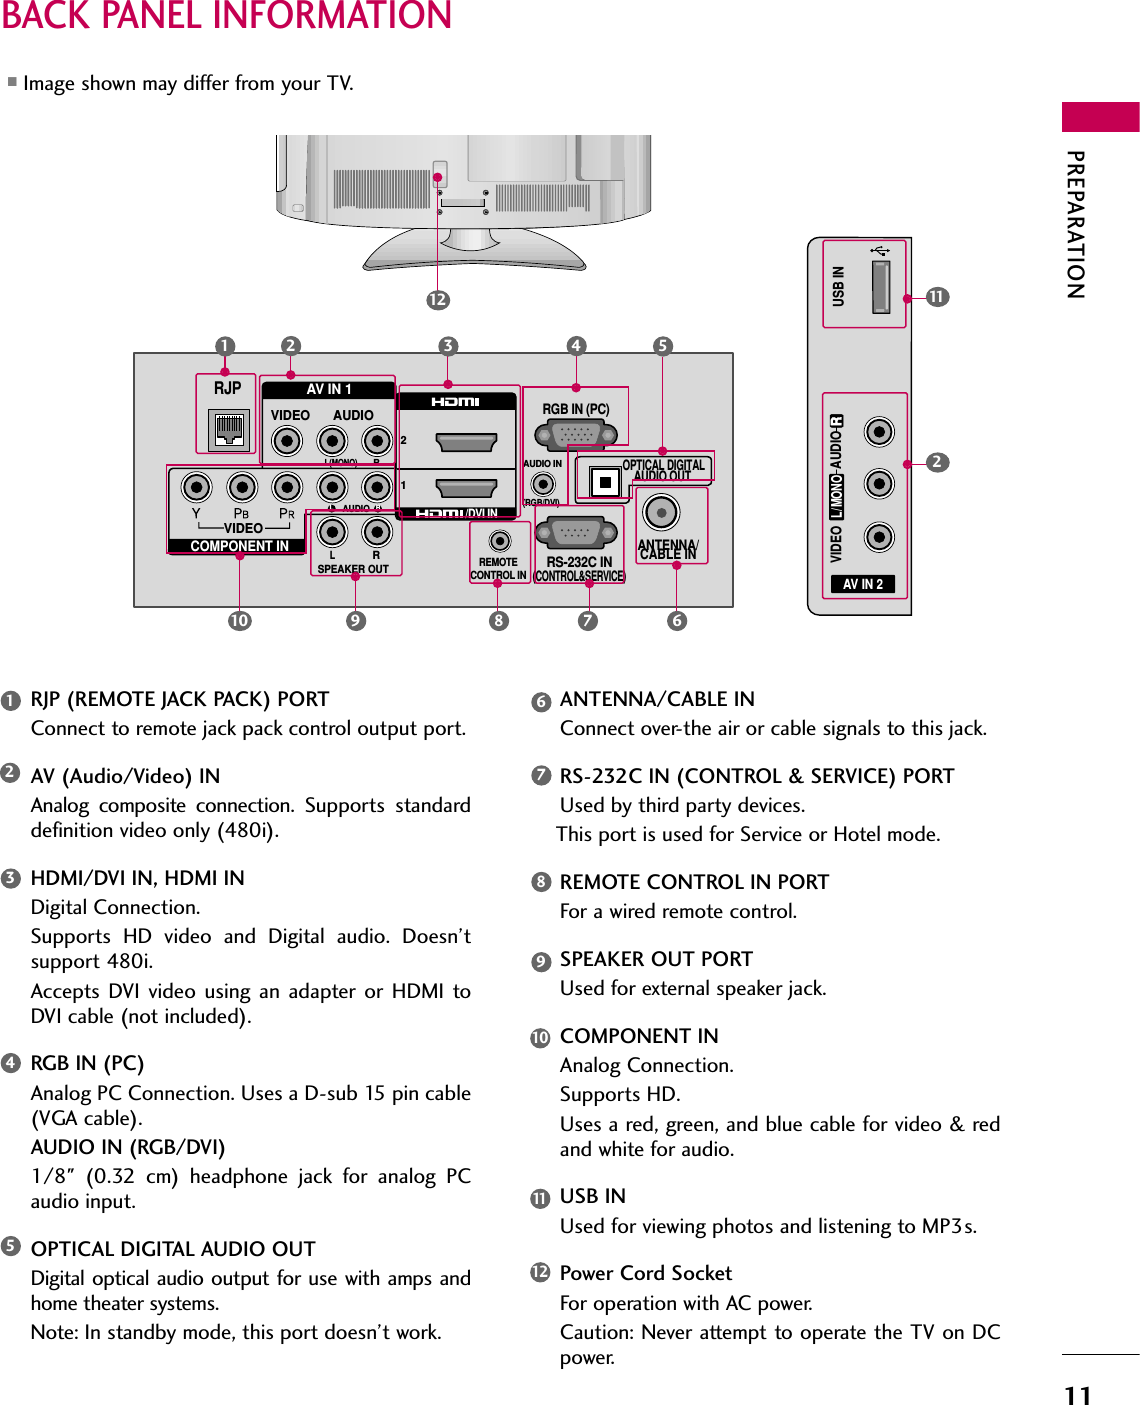 PREPARATION11BACK PANEL INFORMATION■Image shown may differ from your TV.AV IN 2L/MONORAUDIOVIDEOUSB IN211AUDIO IN(RGB/DVI)ANTENNA/CABLE INVIDEOAUDIORGB IN (PC)RJPREMOTECONTROL INVIDEO AUDIOL(MONO)RLSPEAKER OUTRL ROPTICAL DIGITALAUDIO OUT COMPONENT INAV IN 121/DVI INRRS-232C IN(CONTROL&amp;SERVICE)2134578 691012123459876101112RJP (REMOTE JACK PACK) PORTConnect to remote jack pack control output port.AV (Audio/Video) INAnalog  composite  connection. Supports  standarddefinition video only (480i).HDMI/DVI IN, HDMI INDigital Connection. Supports  HD  video  and  Digital  audio.  Doesn’tsupport 480i. Accepts  DVI  video  using  an  adapter  or  HDMI  toDVI cable (not included).RGB IN (PC)Analog PC Connection. Uses a D-sub 15 pin cable(VGA cable).AUDIO IN (RGB/DVI)1/8&quot;  (0.32  cm)  headphone  jack  for  analog  PCaudio input.OPTICAL DIGITAL AUDIO OUTDigital  optical audio output  for  use  with amps andhome theater systems. Note: In standby mode, this port doesn’t work.ANTENNA/CABLE INConnect over-the air or cable signals to this jack.RS-232C IN (CONTROL &amp; SERVICE) PORTUsed by third party devices.This port is used for Service or Hotel mode.REMOTE CONTROL IN PORTFor a wired remote control.SPEAKER OUT PORTUsed for external speaker jack.COMPONENT INAnalog Connection. Supports HD. Uses a red, green, and blue cable for video &amp; redand white for audio.USB INUsed for viewing photos and listening to MP3s.Power Cord SocketFor operation with AC power. Caution: Never attempt to operate the TV on DCpower.